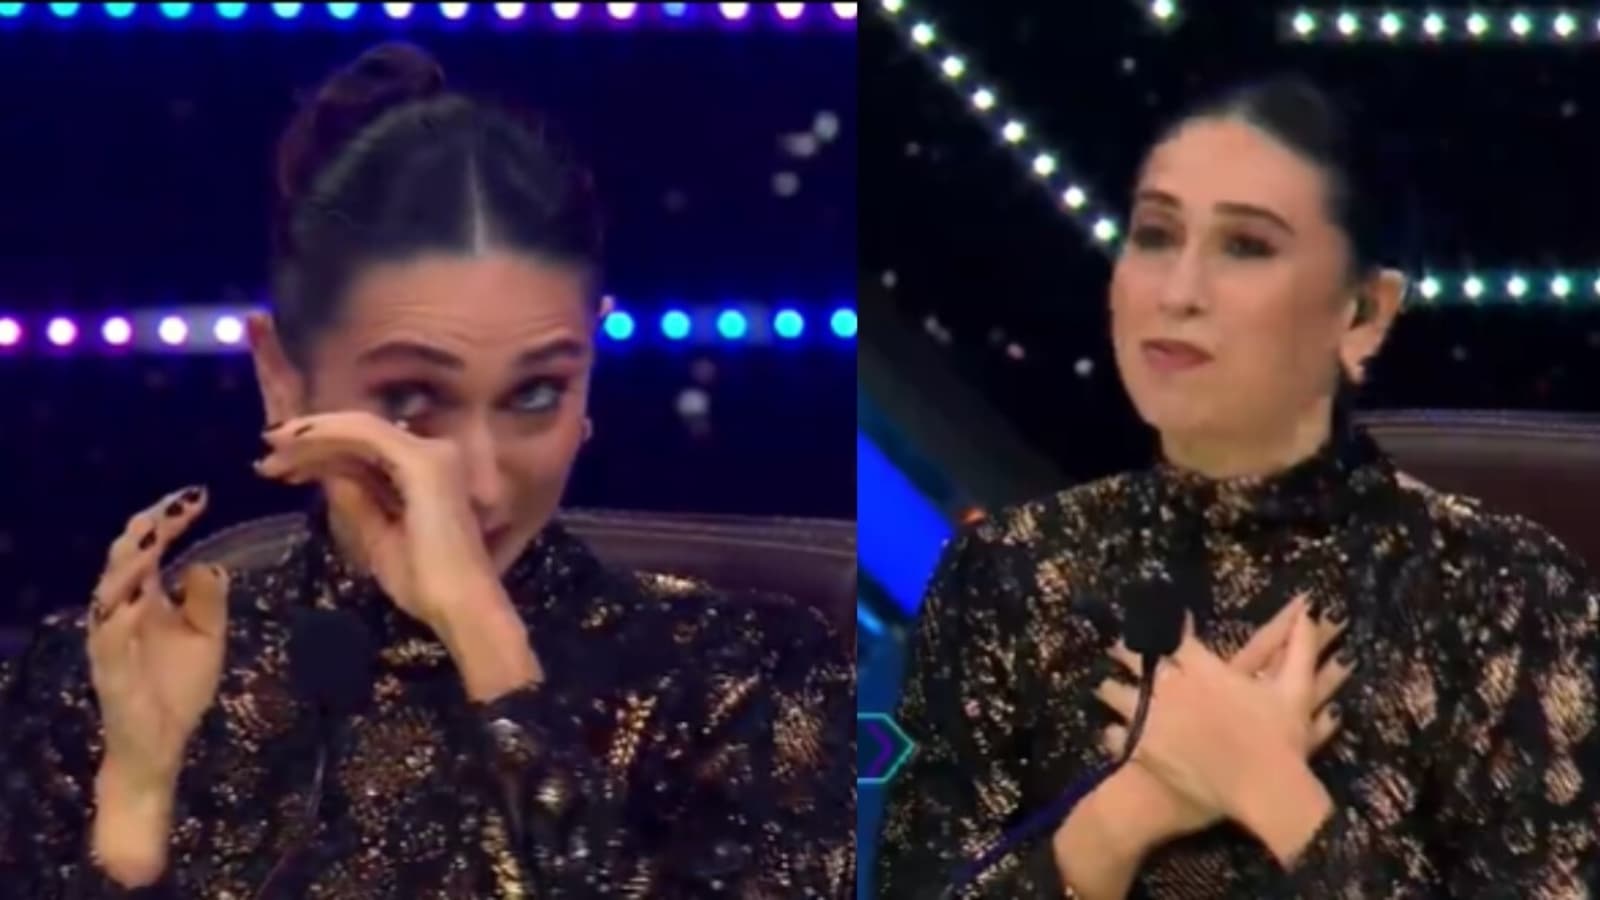 Porn Video Karisma Kapoor - Karisma Kapoor, filling in for Shilpa Shetty, cries on Super Dancer 4 sets.  Here's why - Hindustan Times